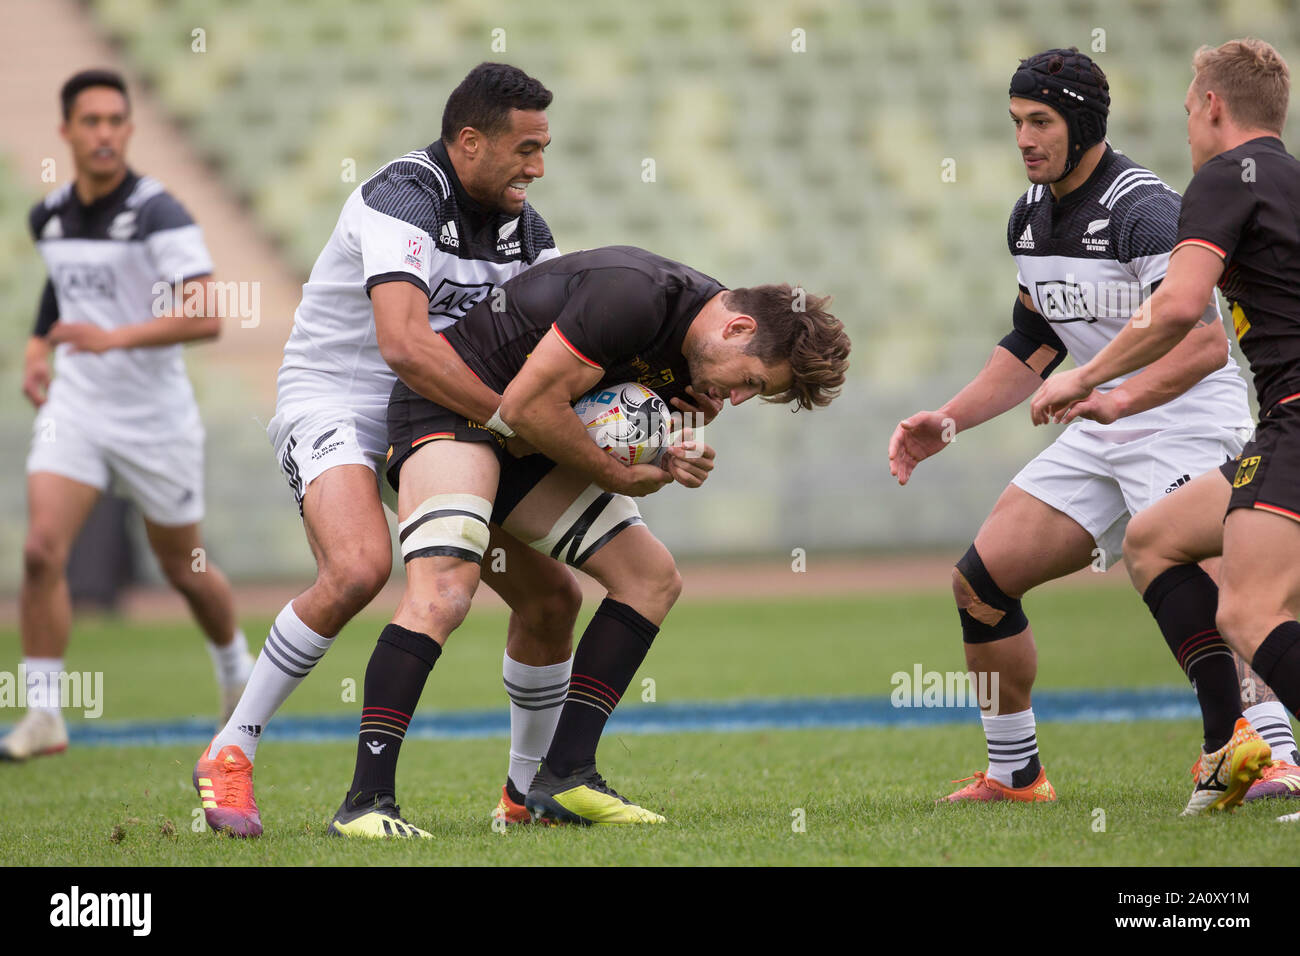 Munich, Germany. 22nd Sep, 2019. Oktoberfest Sevens Rugby Tournament in Munich on 21 and 22 September 2019. Match for third place: Germany - New Zealand. Robert Haase (Germany) is moored by Sione Molia (New Zealand). On the right Trael Joass (New Zealand) is lurking. Credit: Jürgen Kessler/dpa/Alamy Live News Stock Photo